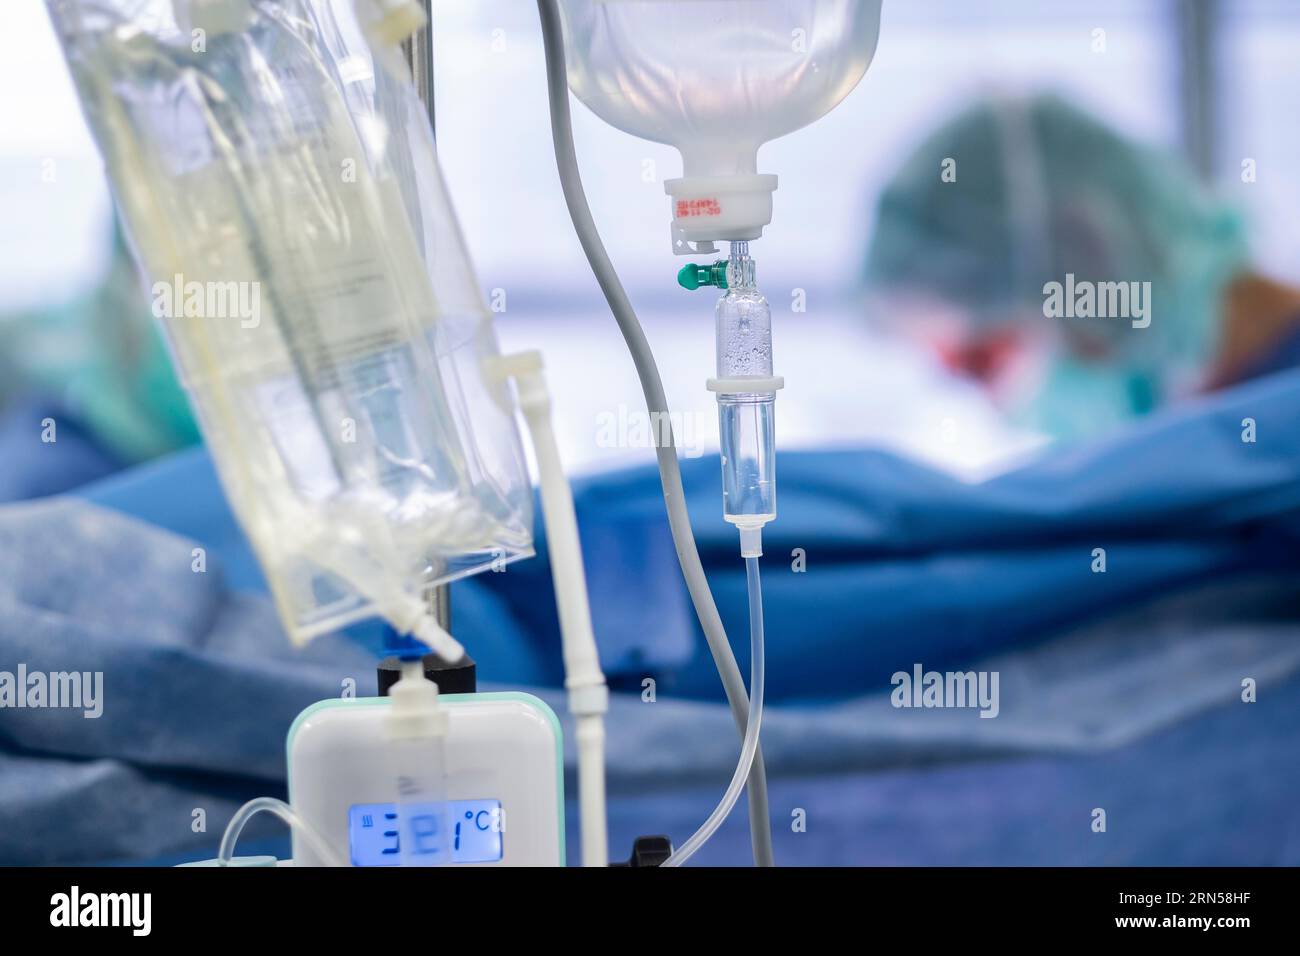 A drip with an infusion solution during an operation in a hospital Stock Photo